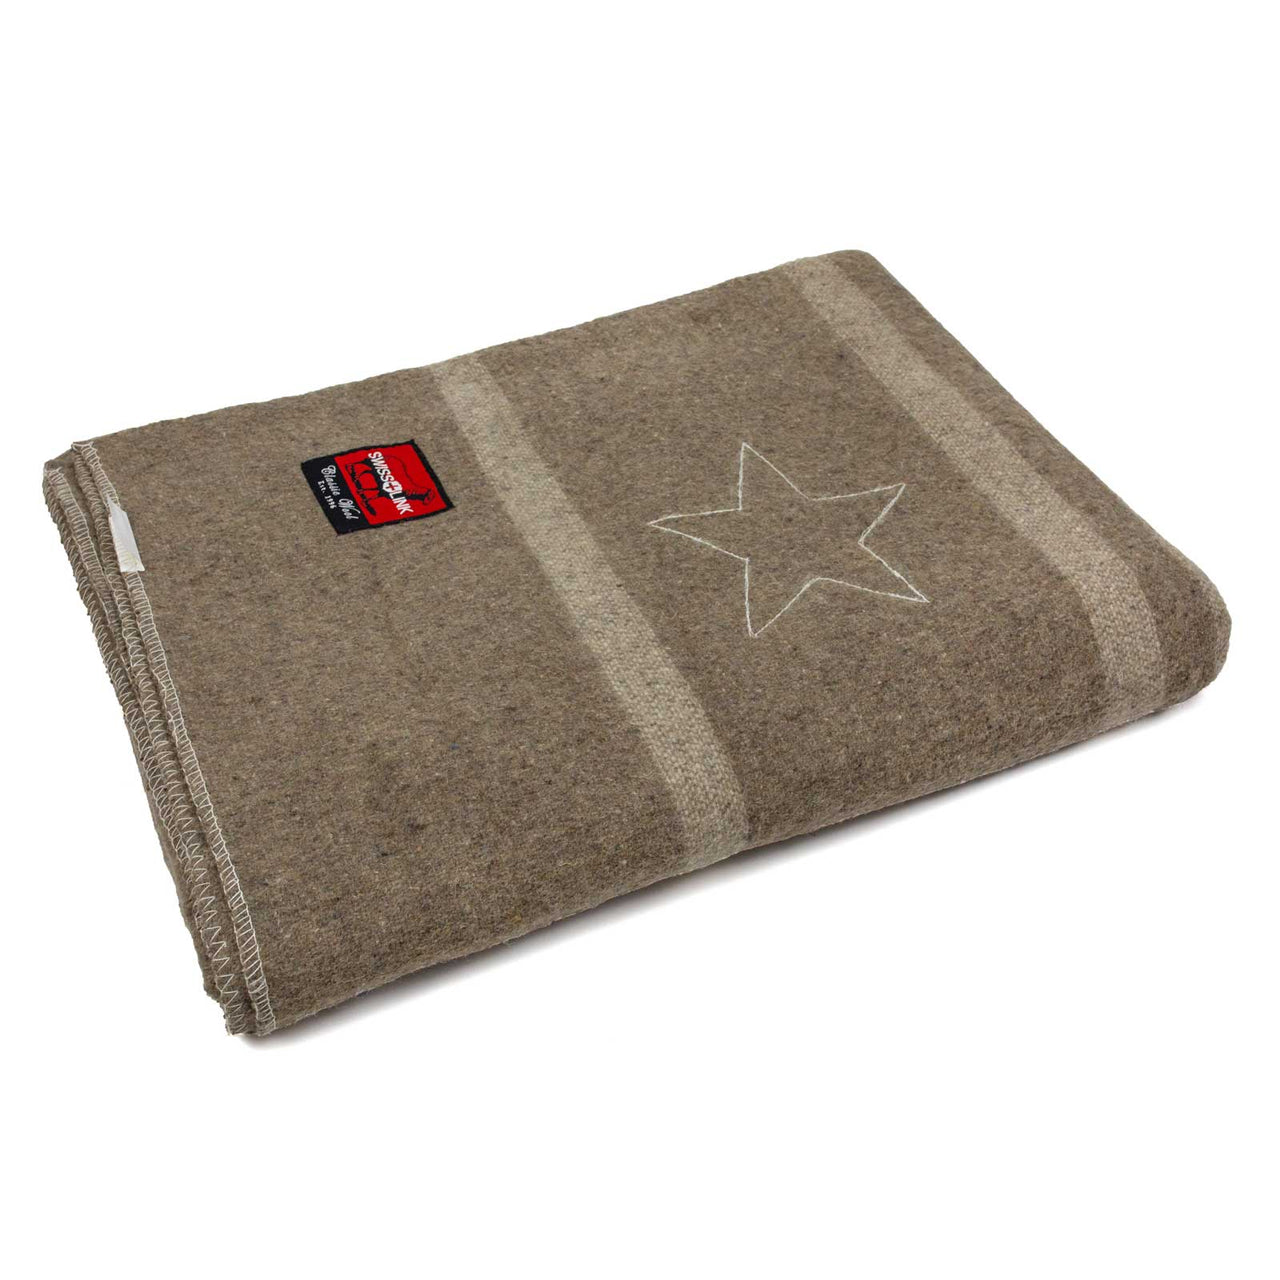 Italian Army Officers Reproduction Wool Blanket with Star